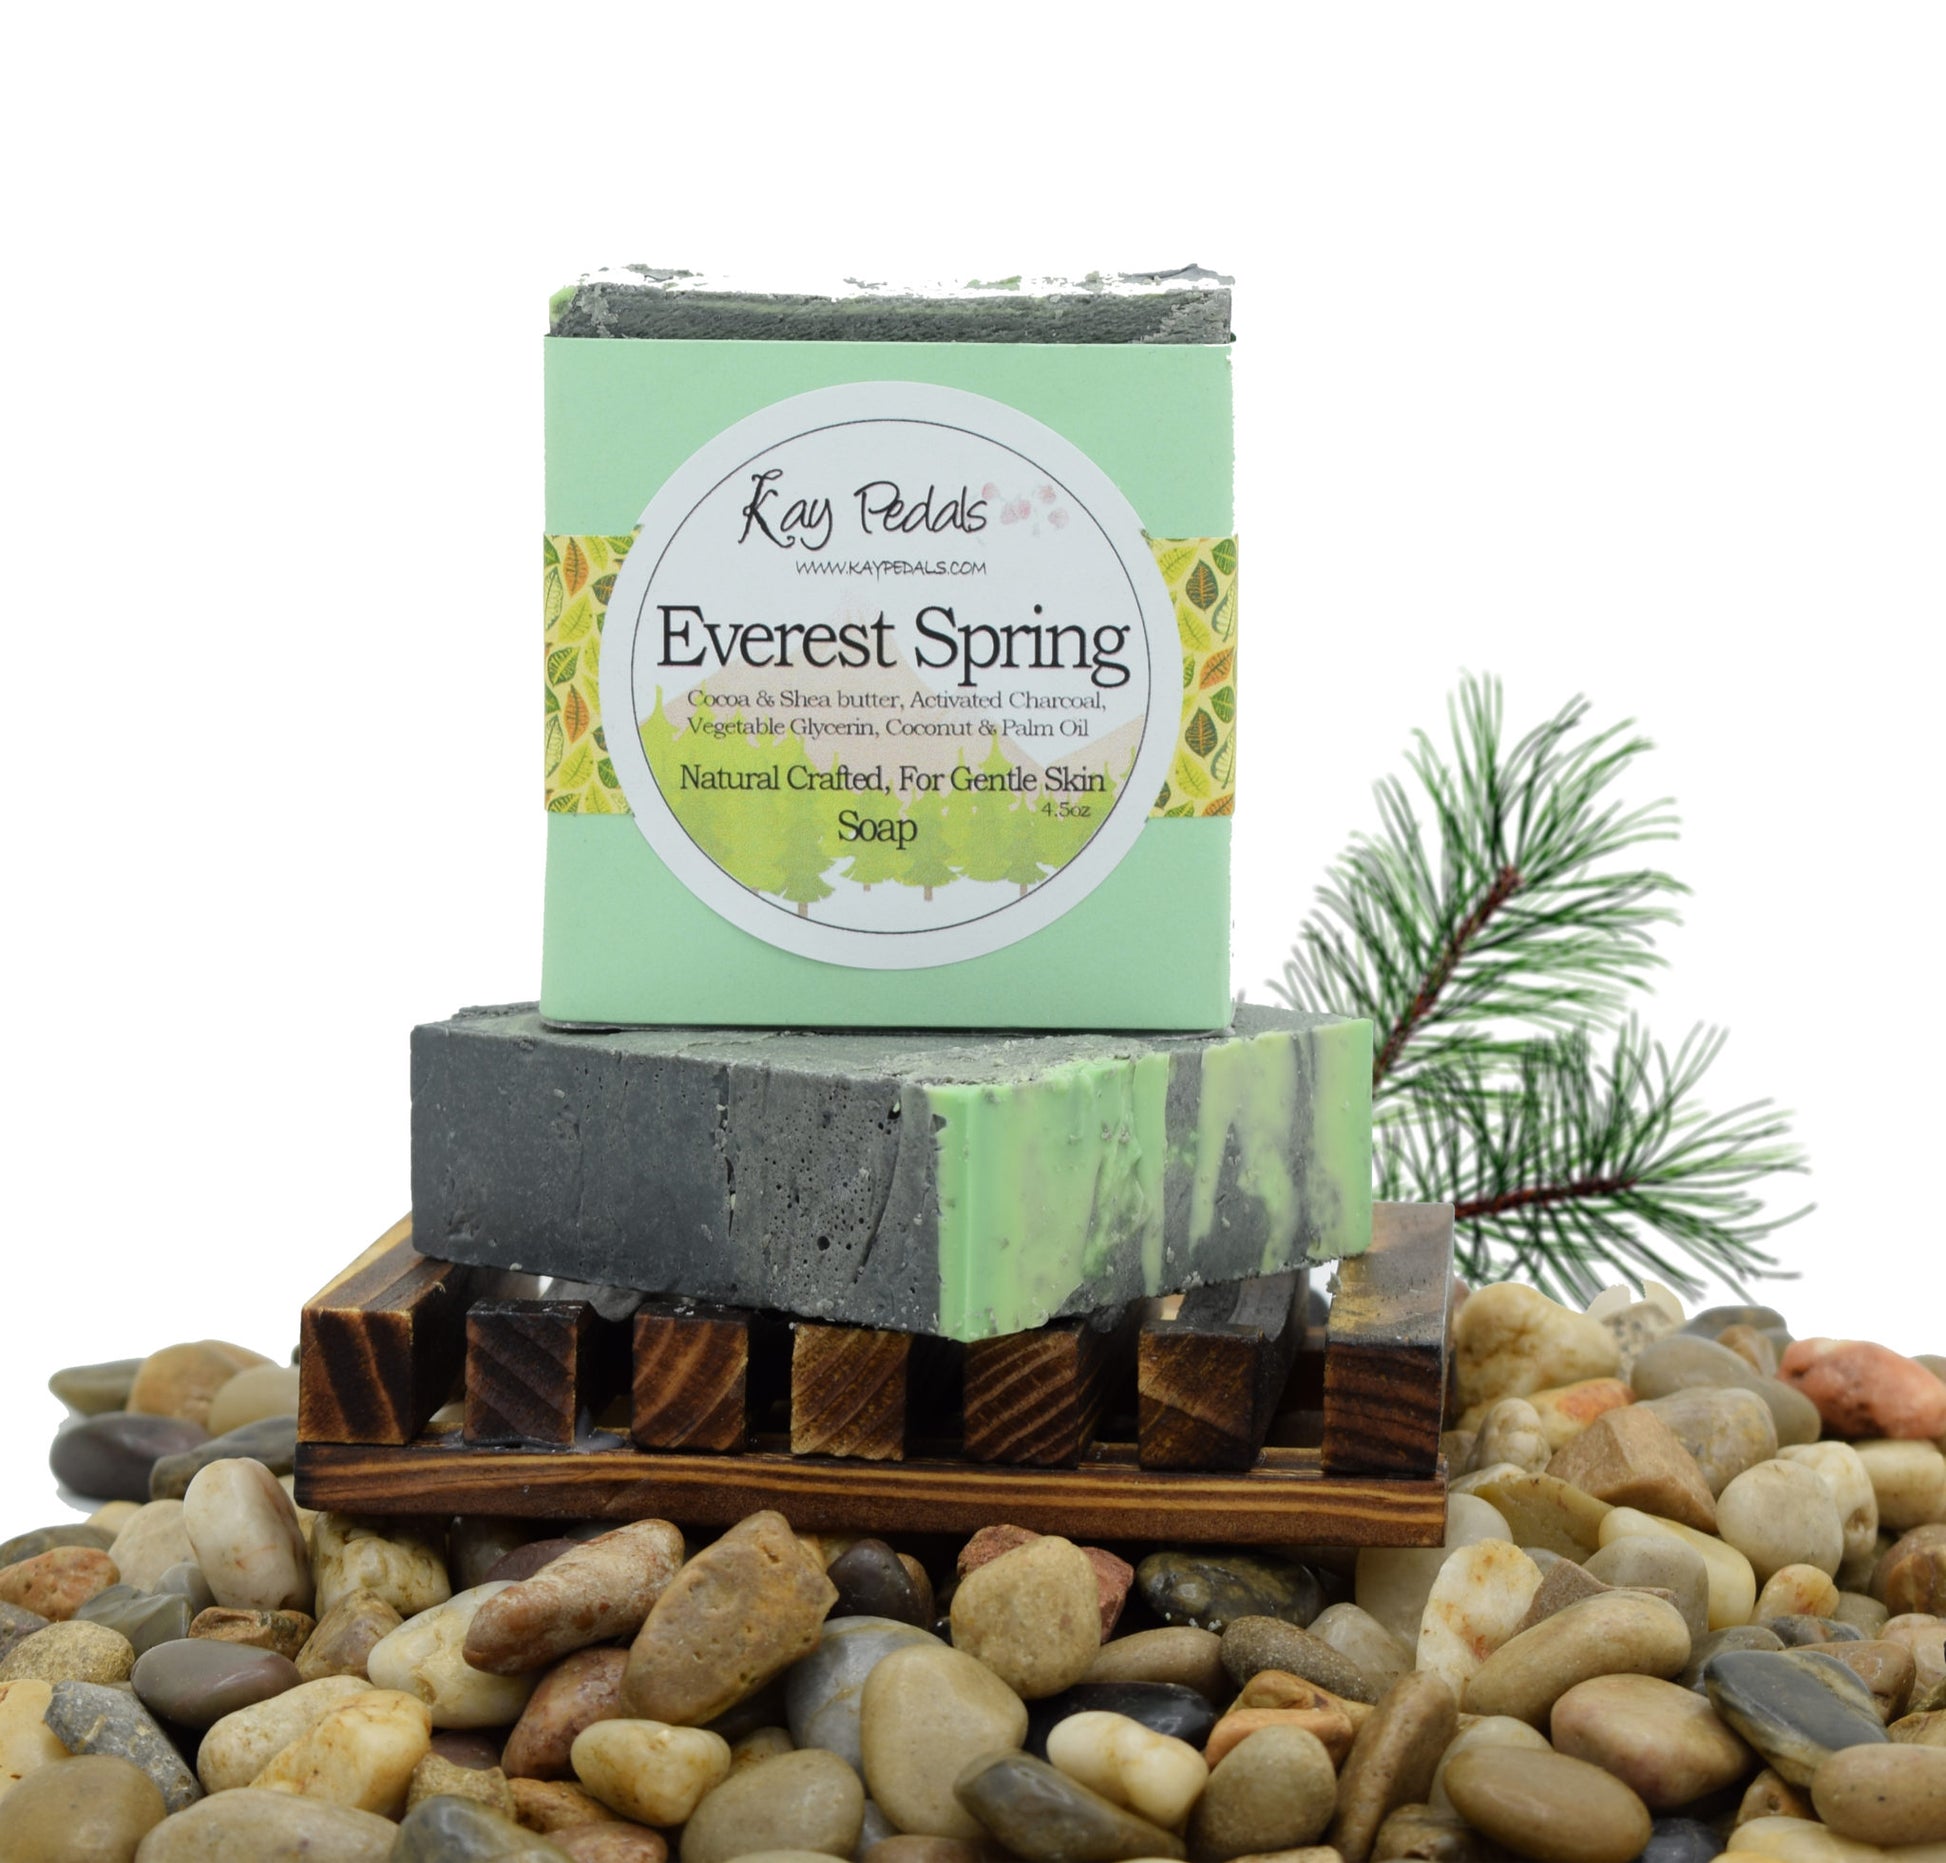 Everest Spring Natural Crafted  Bar Soap 4.5oz - Kay Pedals